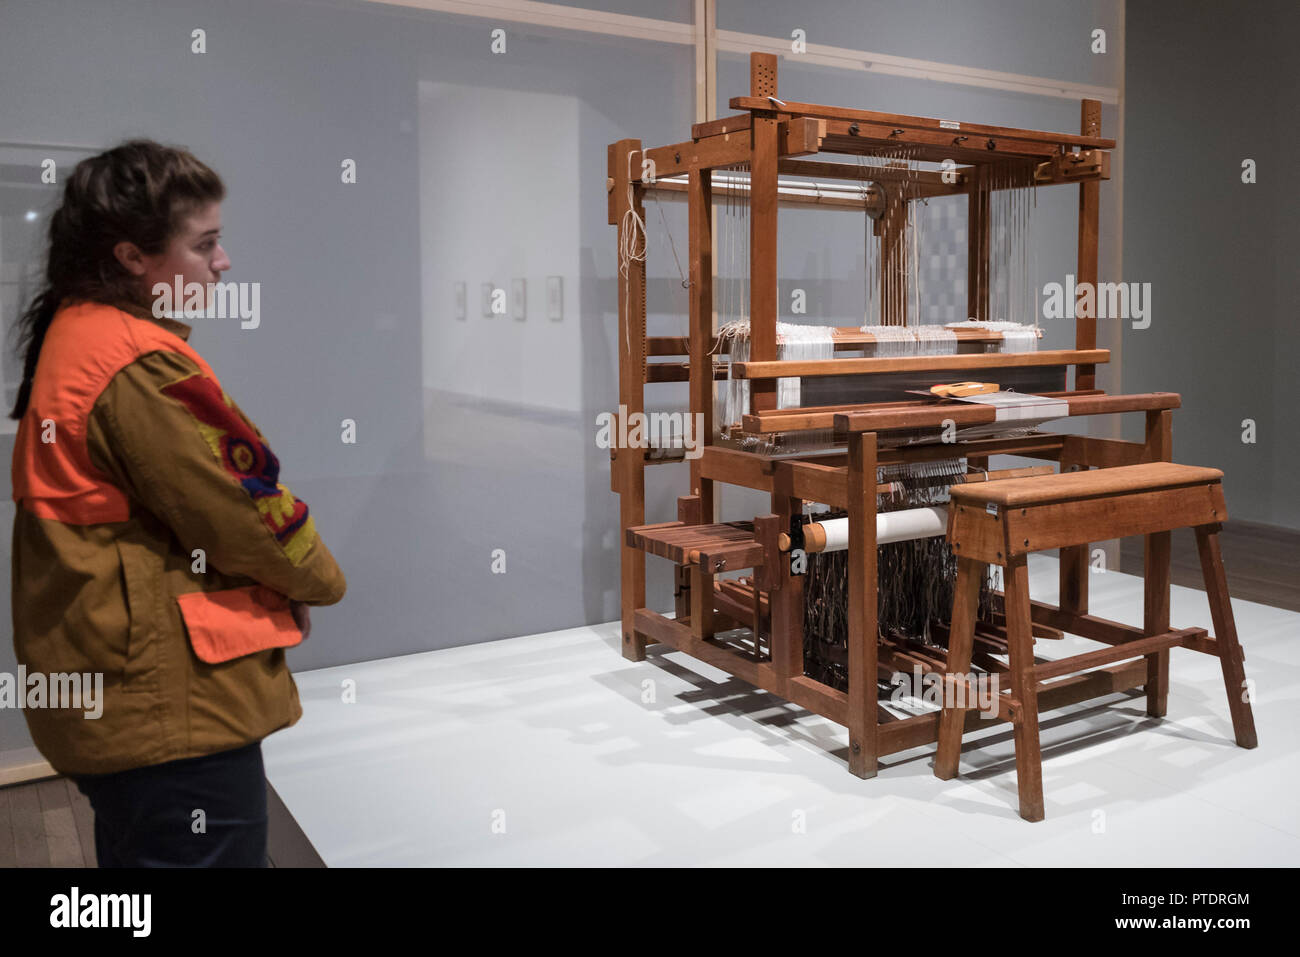 London, UK. 9 October 2018. A staff member views a 12 Shaft Counter March  Loom, 1950s, similar to one used by Anni Albers and fellow students at the  Bauhaus weaving workshop. Preview